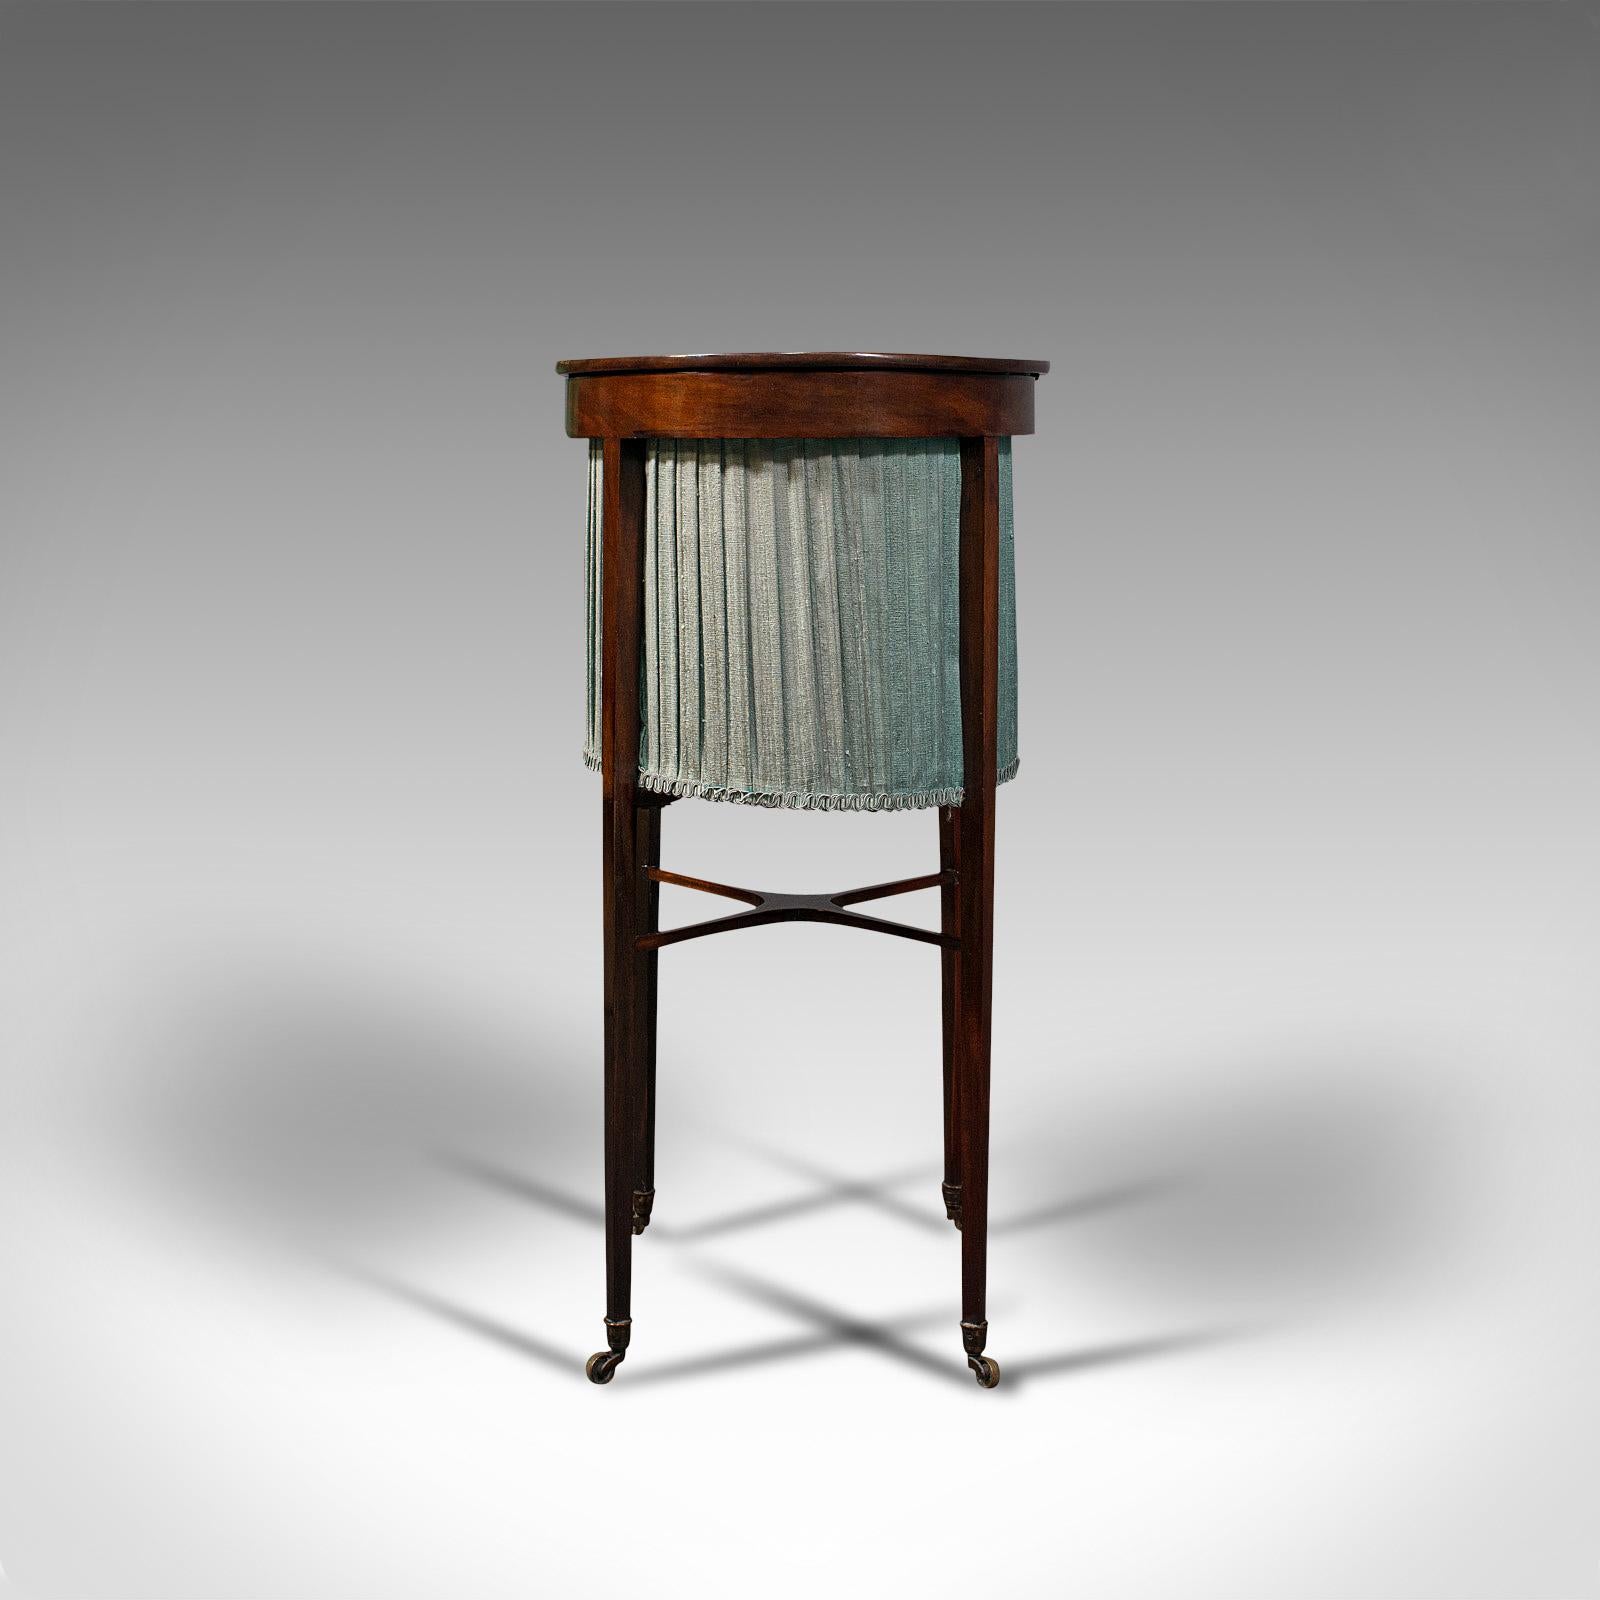 19th Century Antique Sewing Table, English, Mahogany, Silk Cotton, Work, Regency, Circa 1820 For Sale